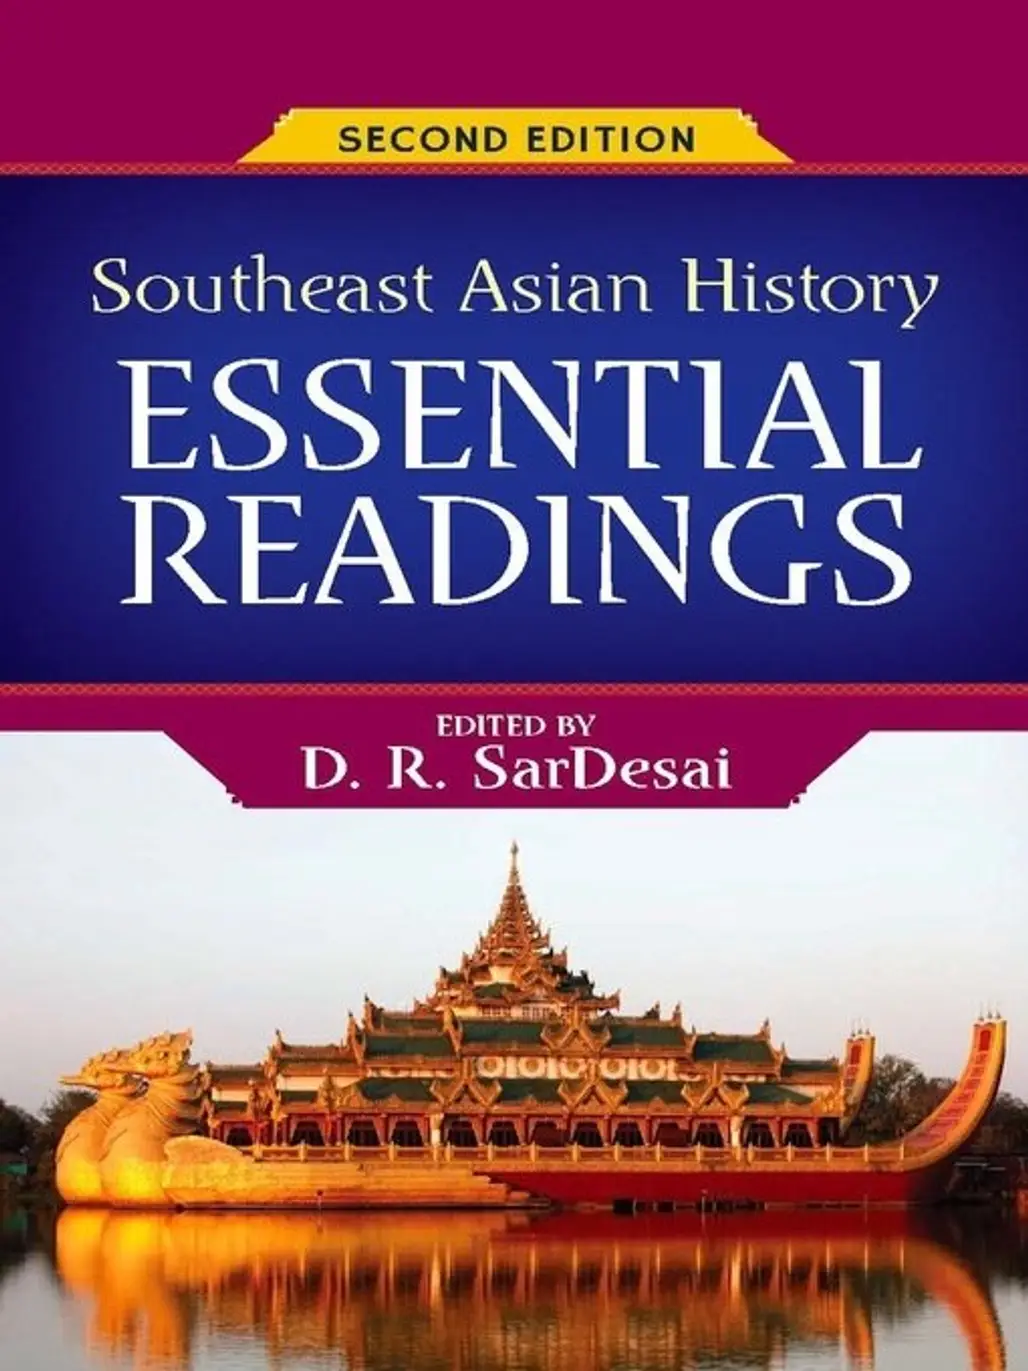 Southeast Asian History: Essential Readings